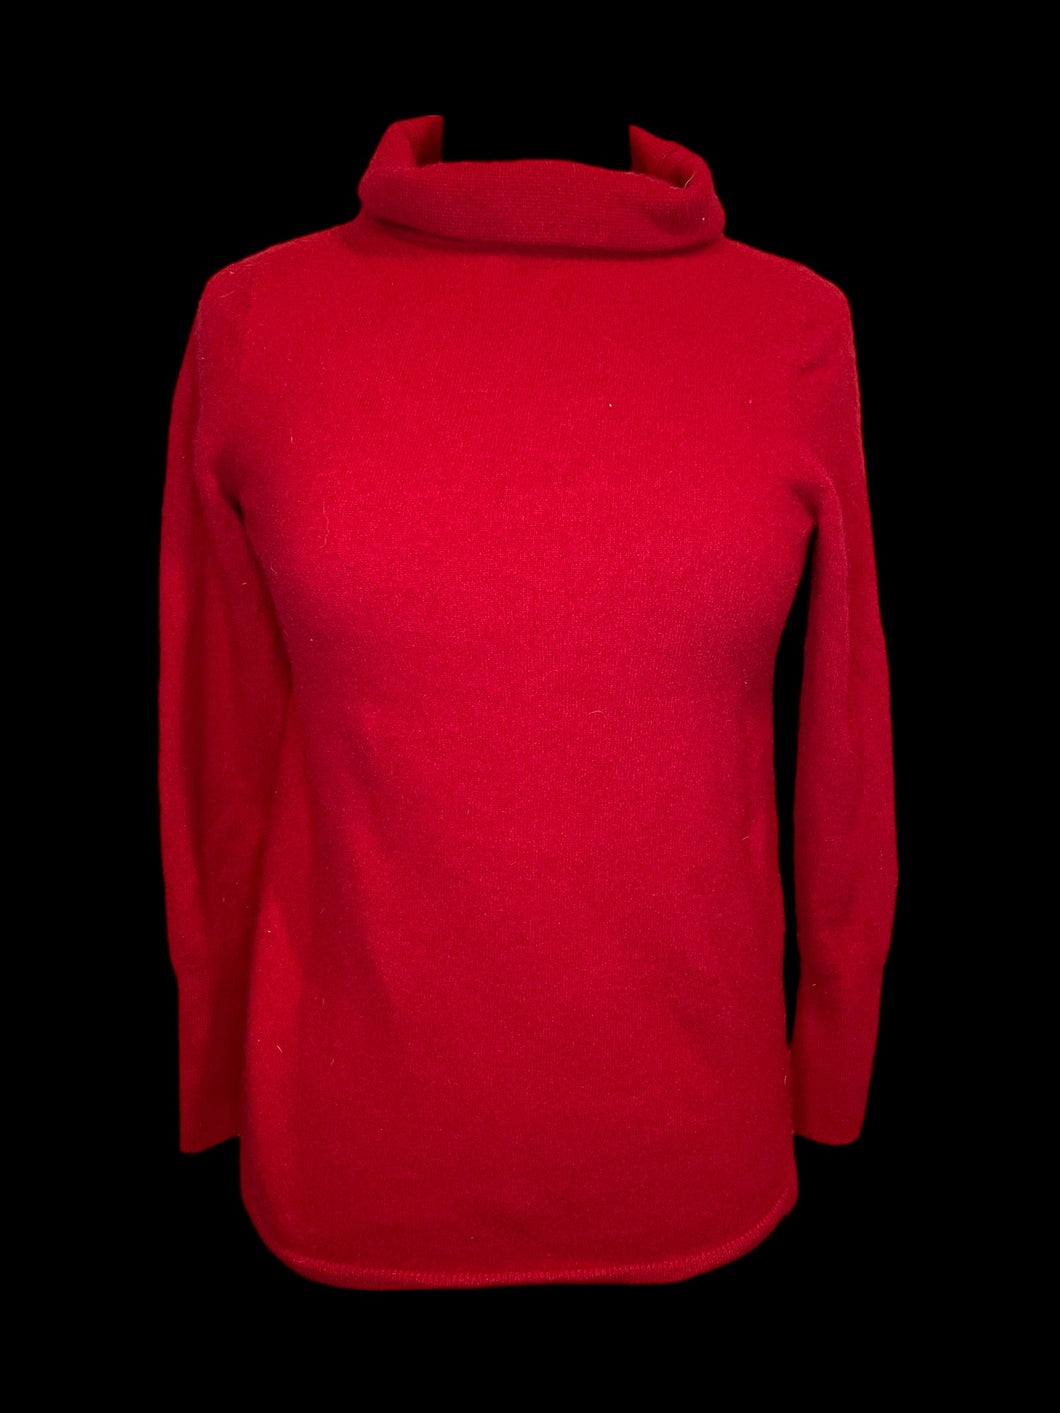 S Red cashmere long sleeve turtleneck sweater